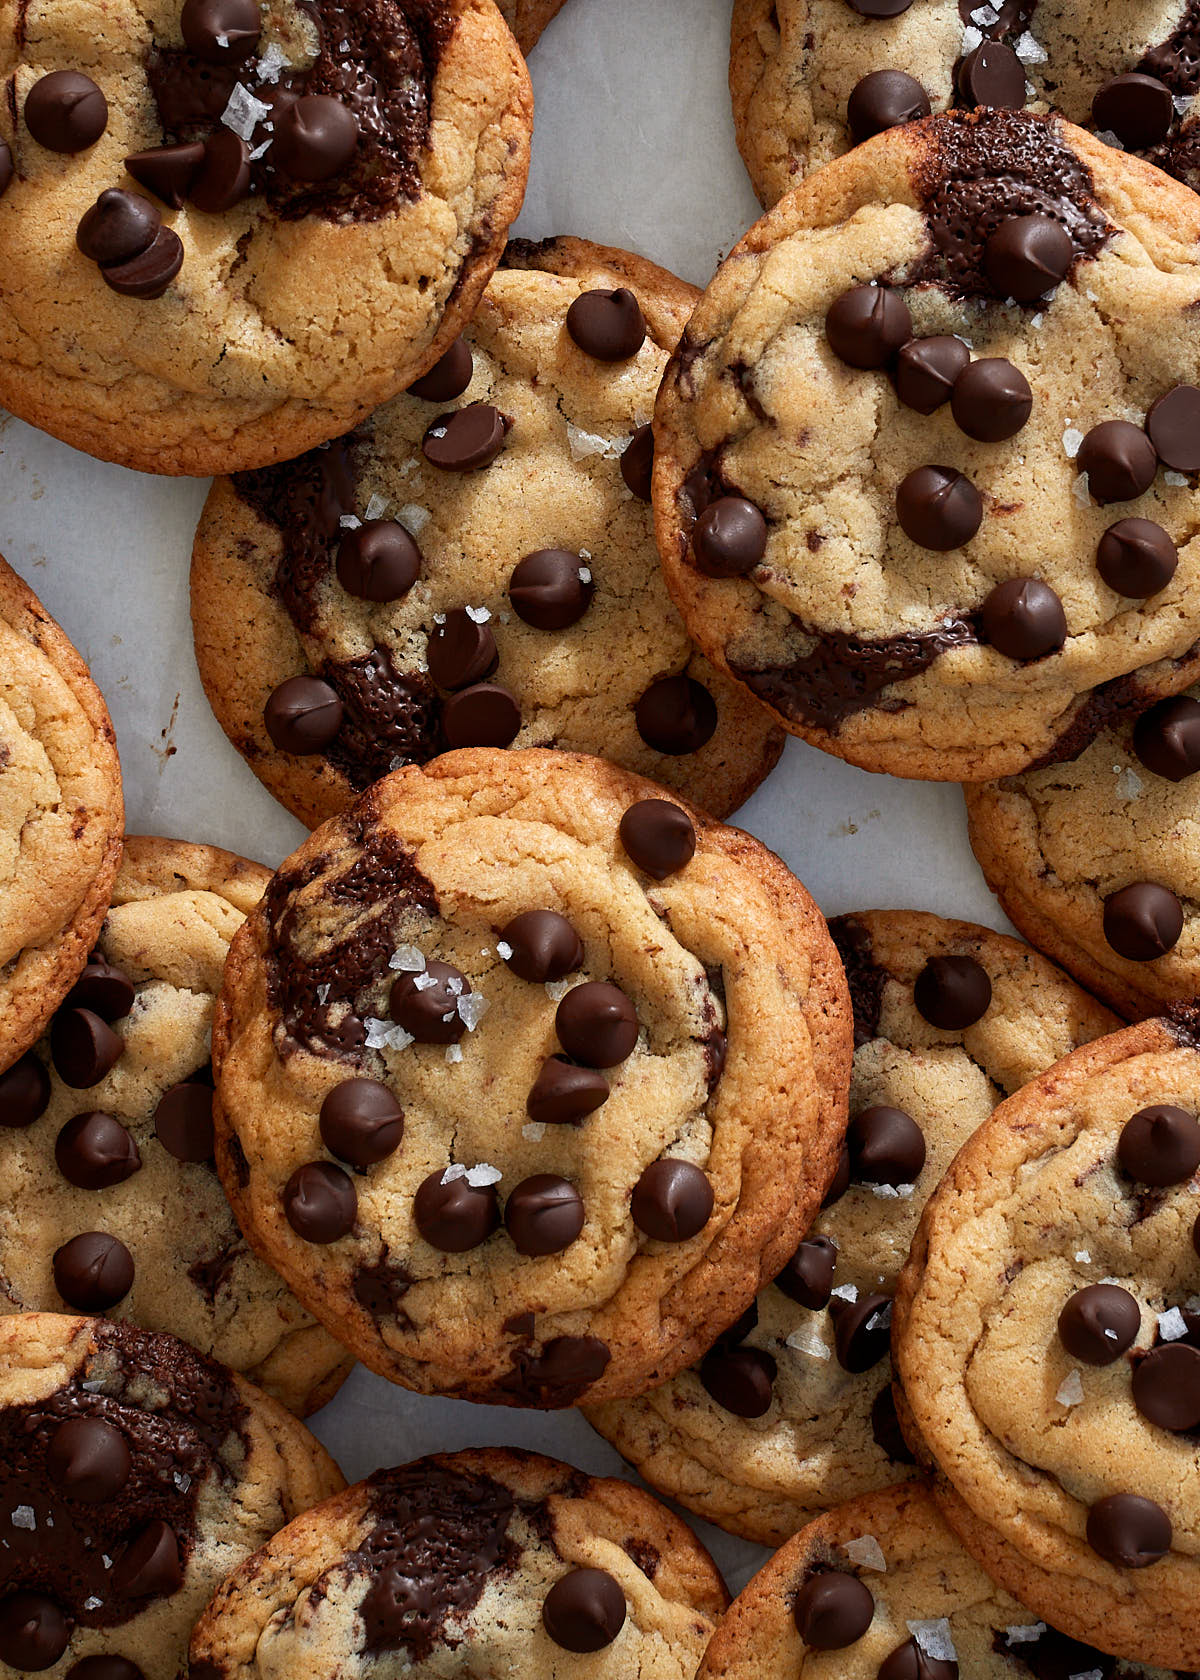 A pile of chocolate chip cookies on parchment paper.